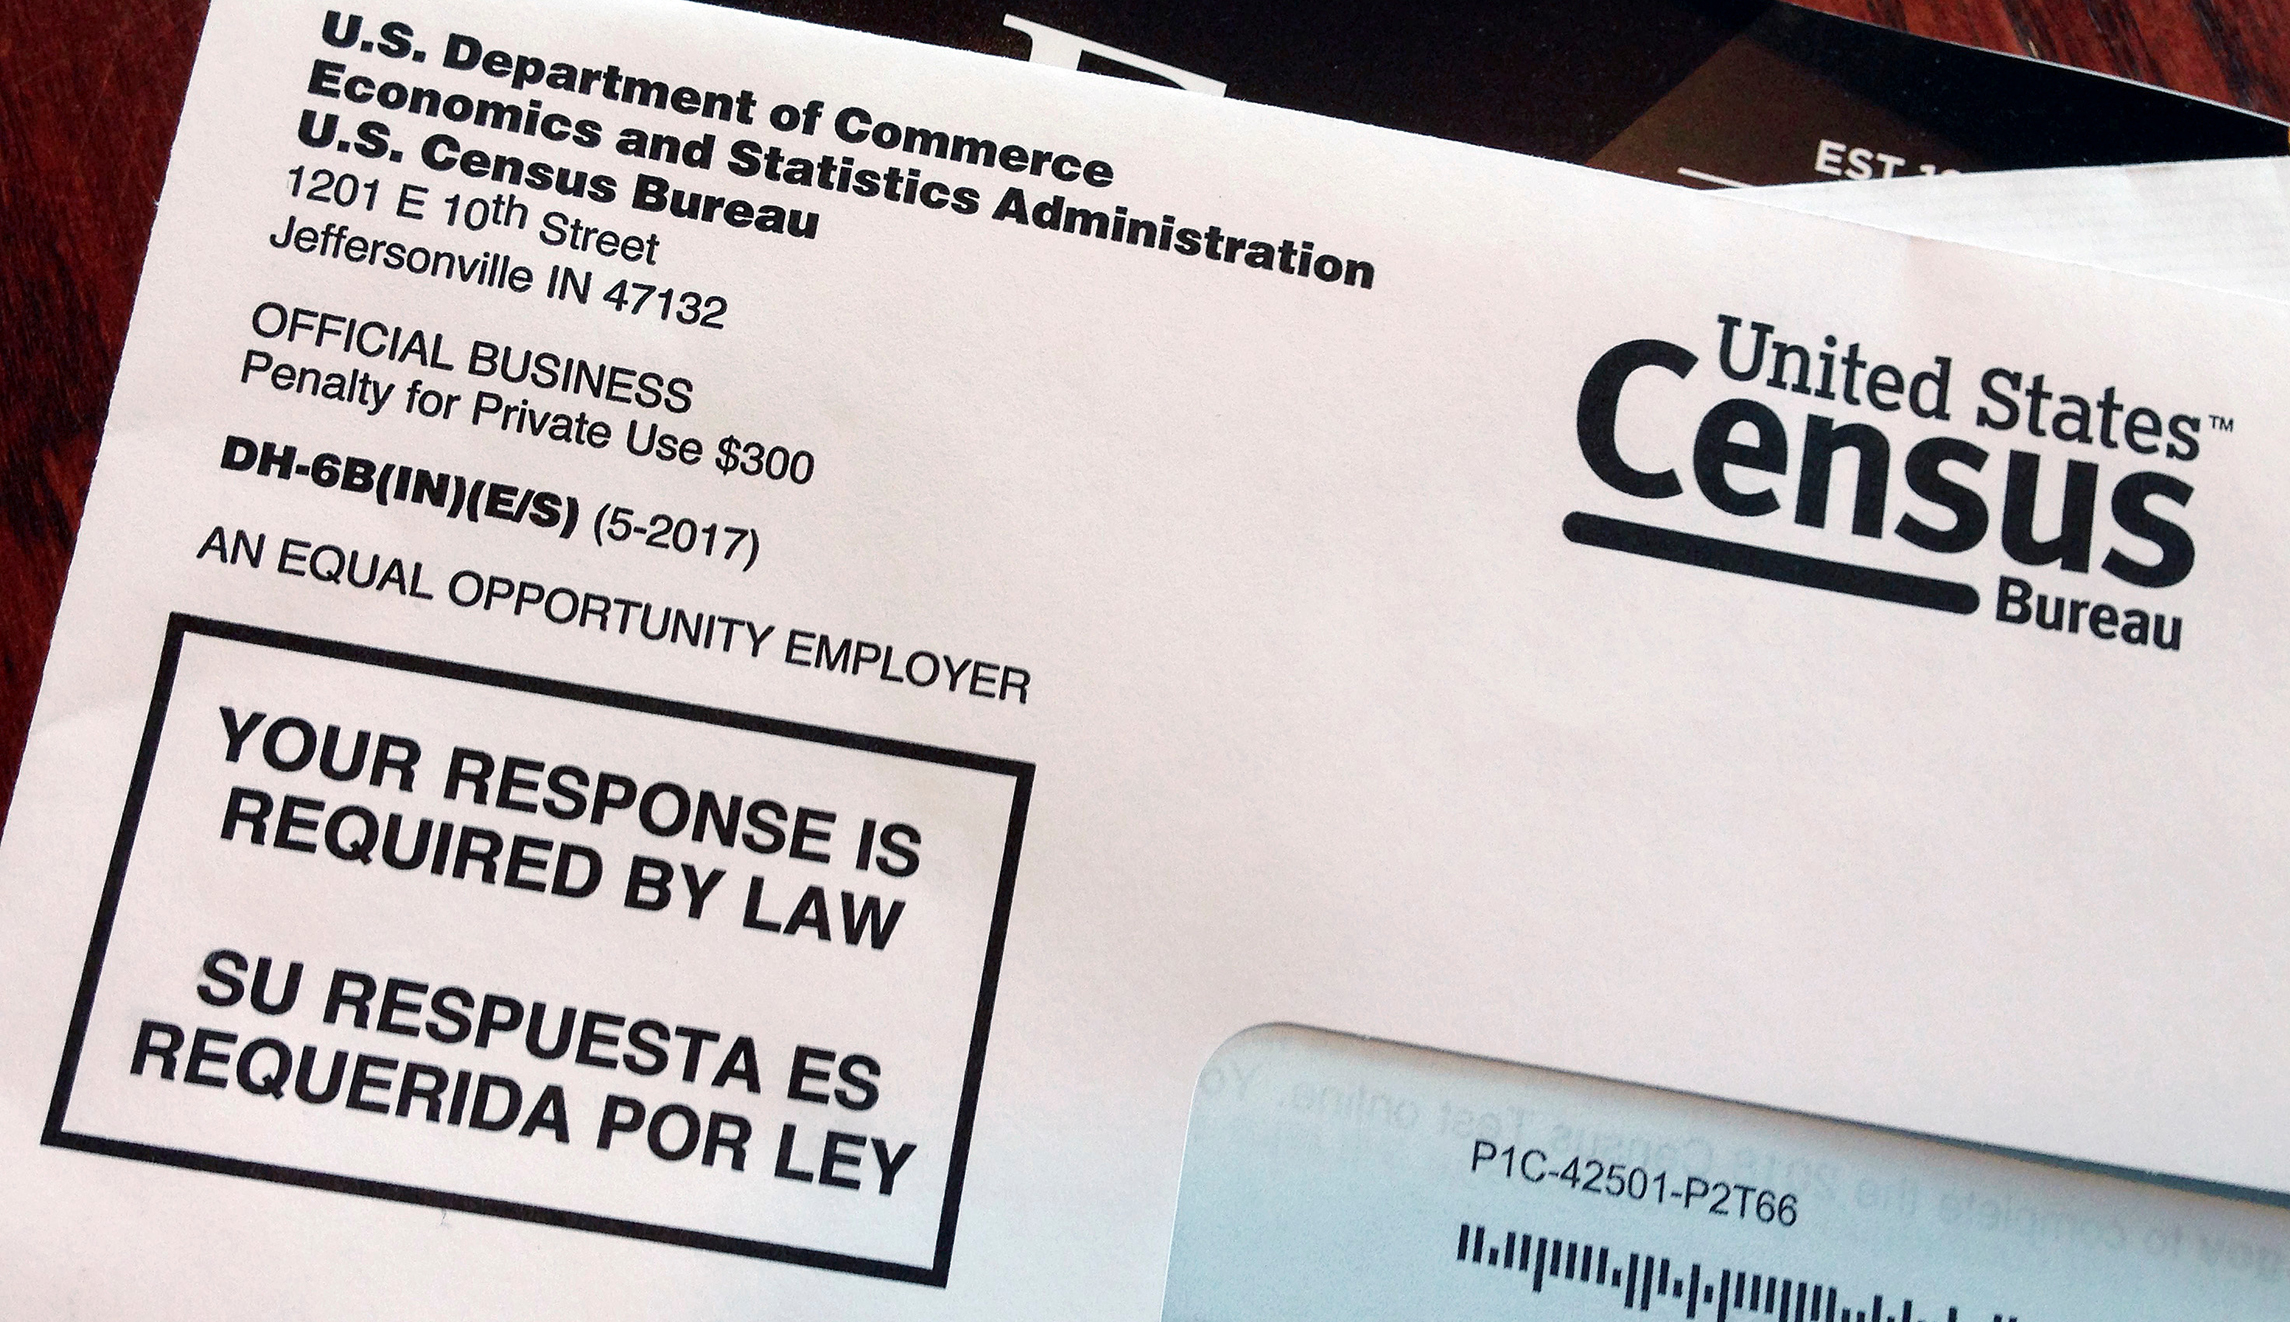 This March 23, 2018 file photo shows an envelope containing a 2018 census letter mailed to a resident in Providence, R.I., as part of the nation's only test run of the 2020 Census. A Trump administration plan to include a citizenship question on the 2020 Census has prompted legal challenges from many Democratic-led states.